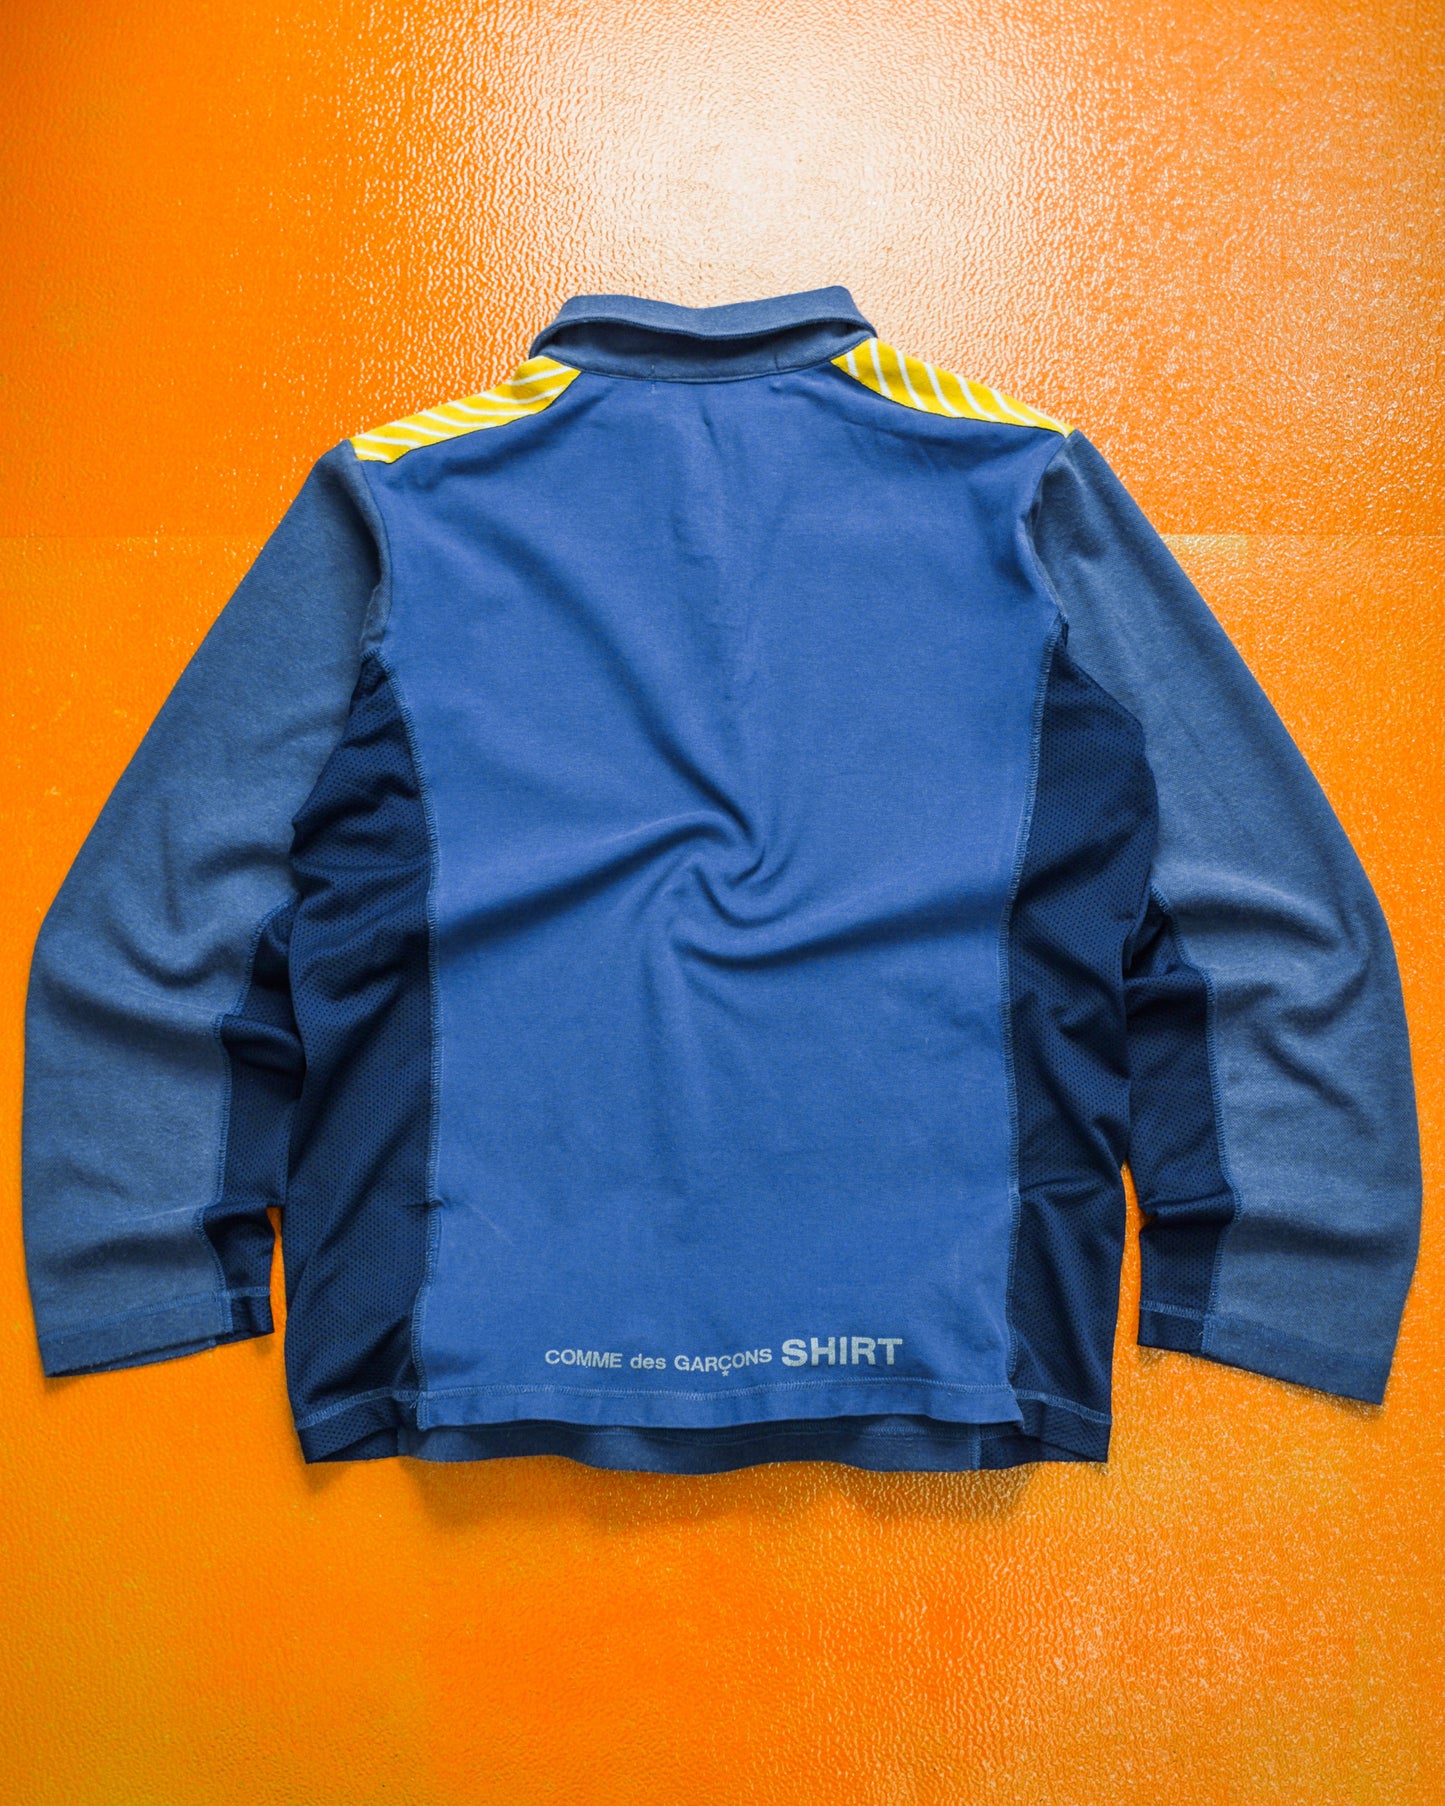 Additional shipping for Blue Hybrid Longsleeve Zip Polo Shirt (L)